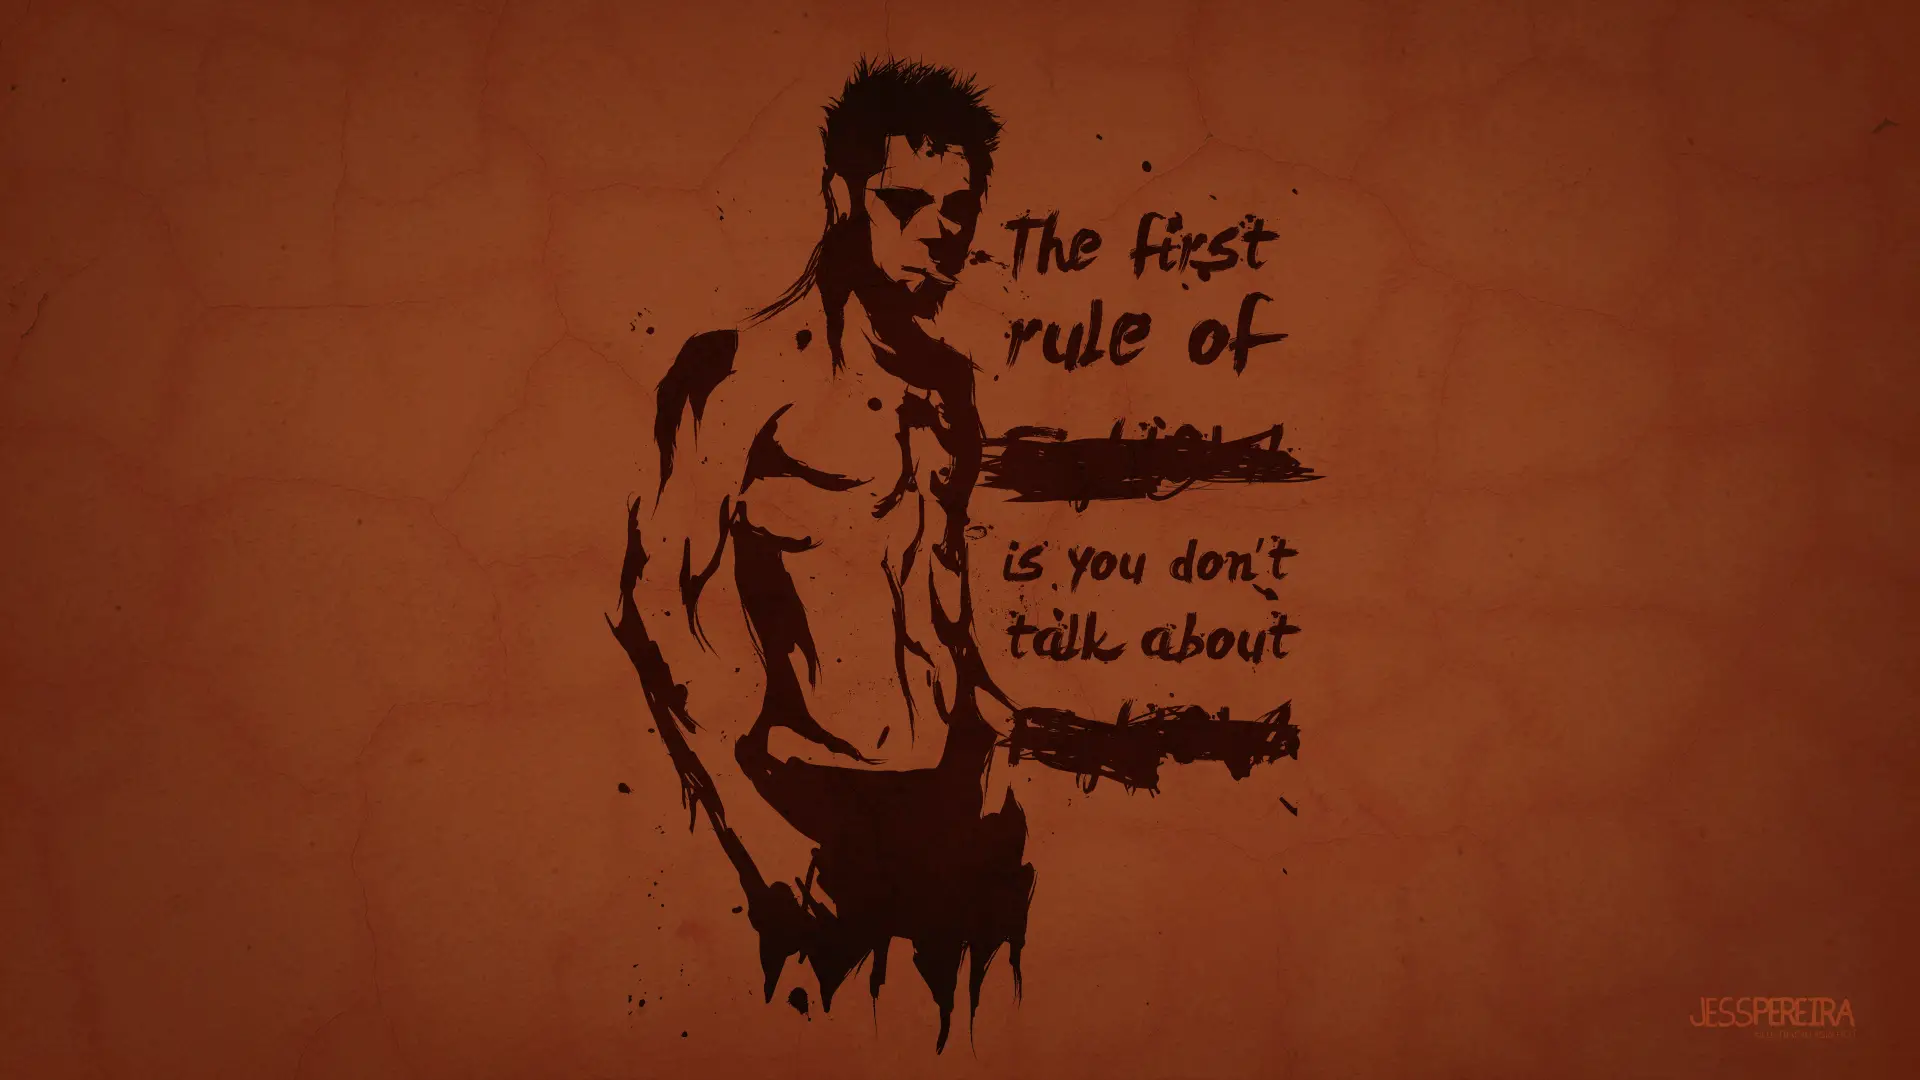 25 Most Memorable & Badass Fight Club Quotes